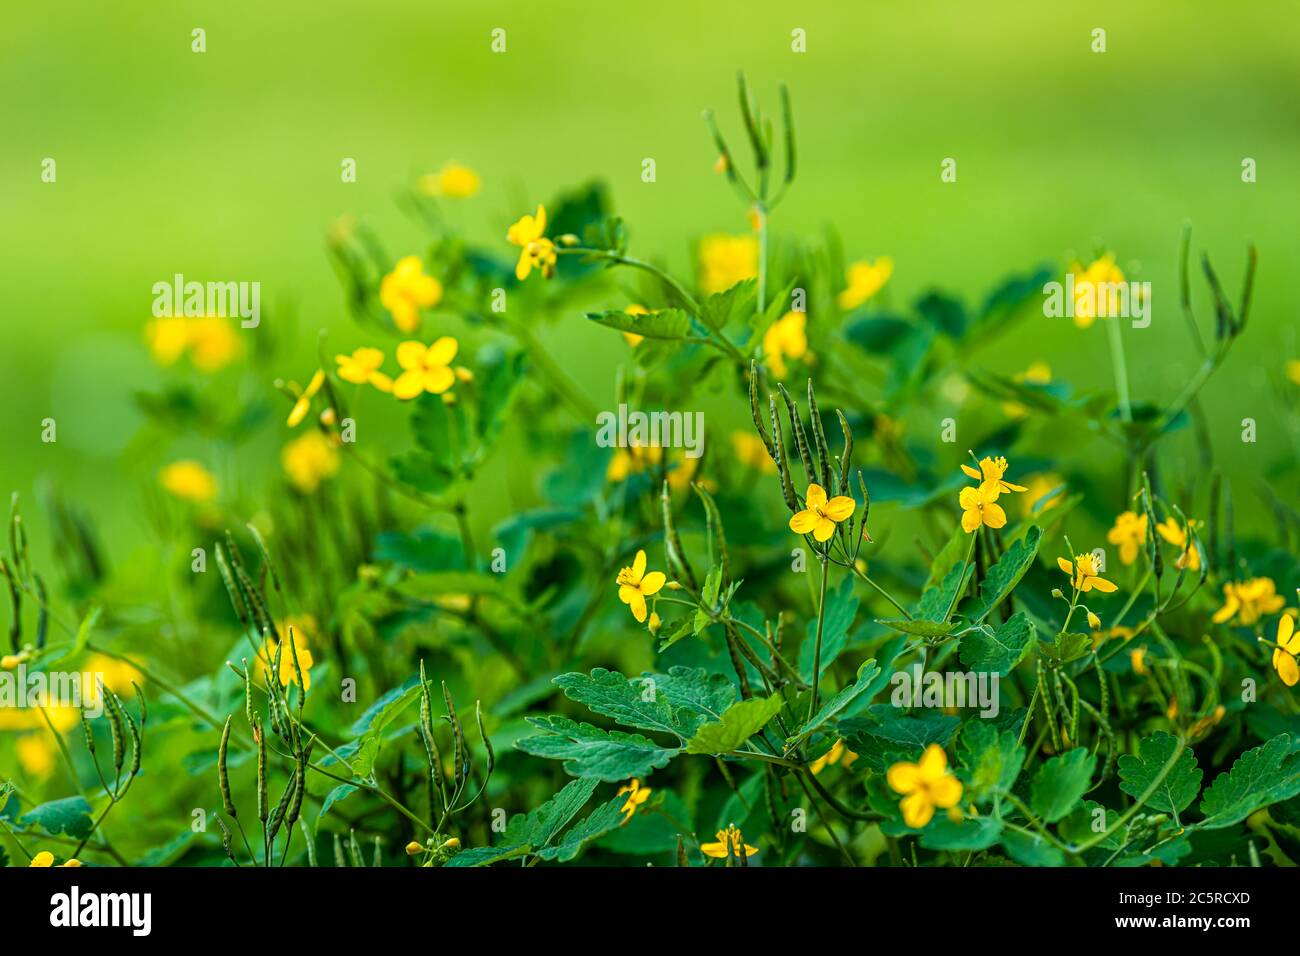 Bokeh green background and Greater Celandine or Chelidonium majus yellow flowers closeup of herb used for medicine Stock Photo